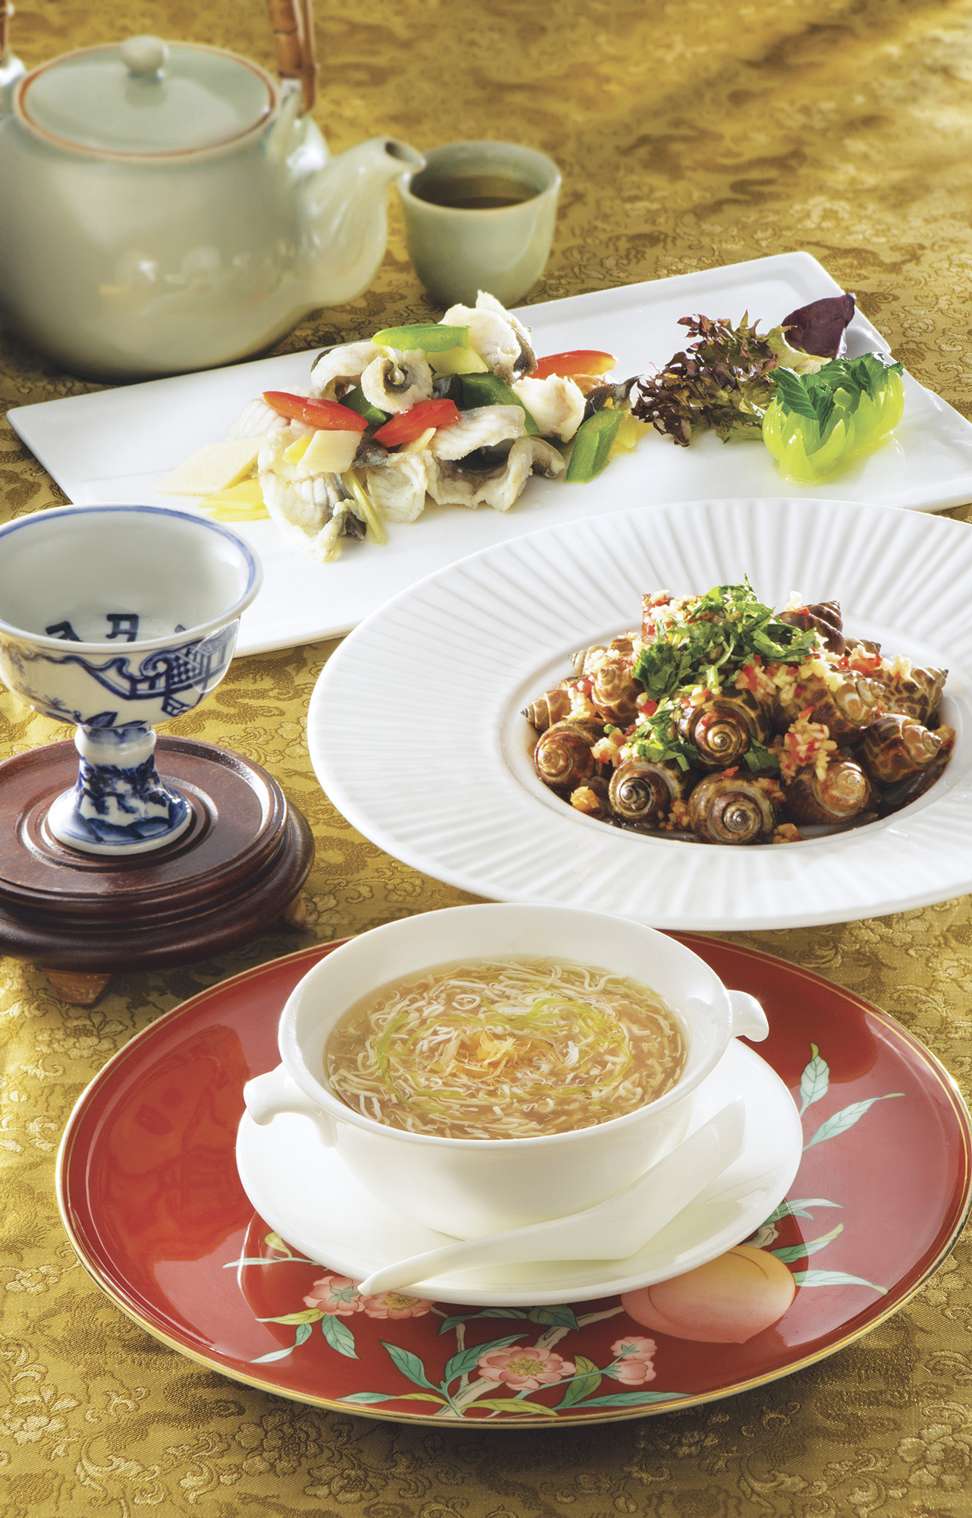 The Yangzhou in Spring selection from the Regal Airport Hotel’s Dragon Inn.